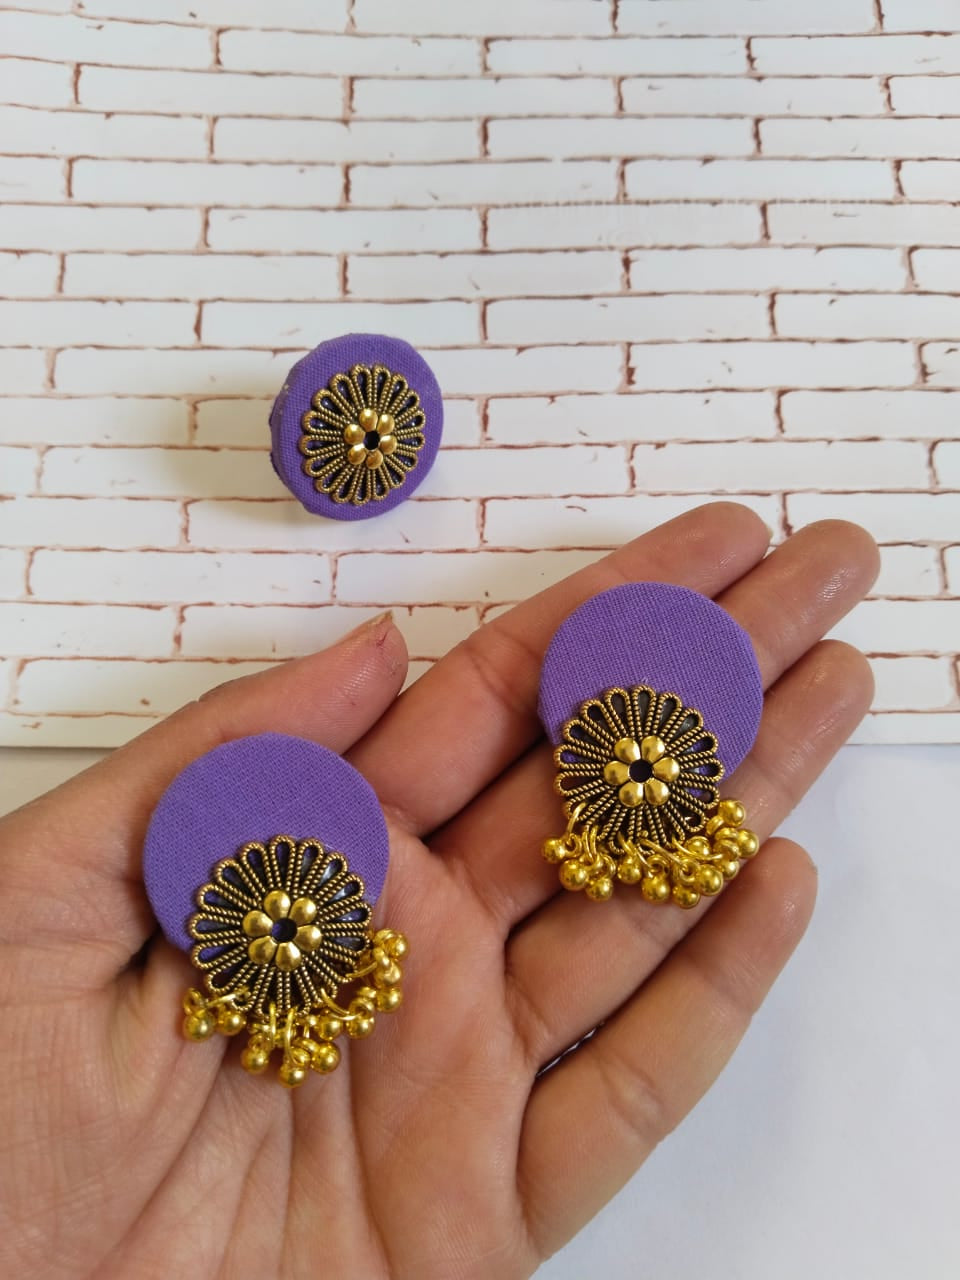 Palm holding Purple earrings and ring in round shapes with golden charms on white grey backdrop